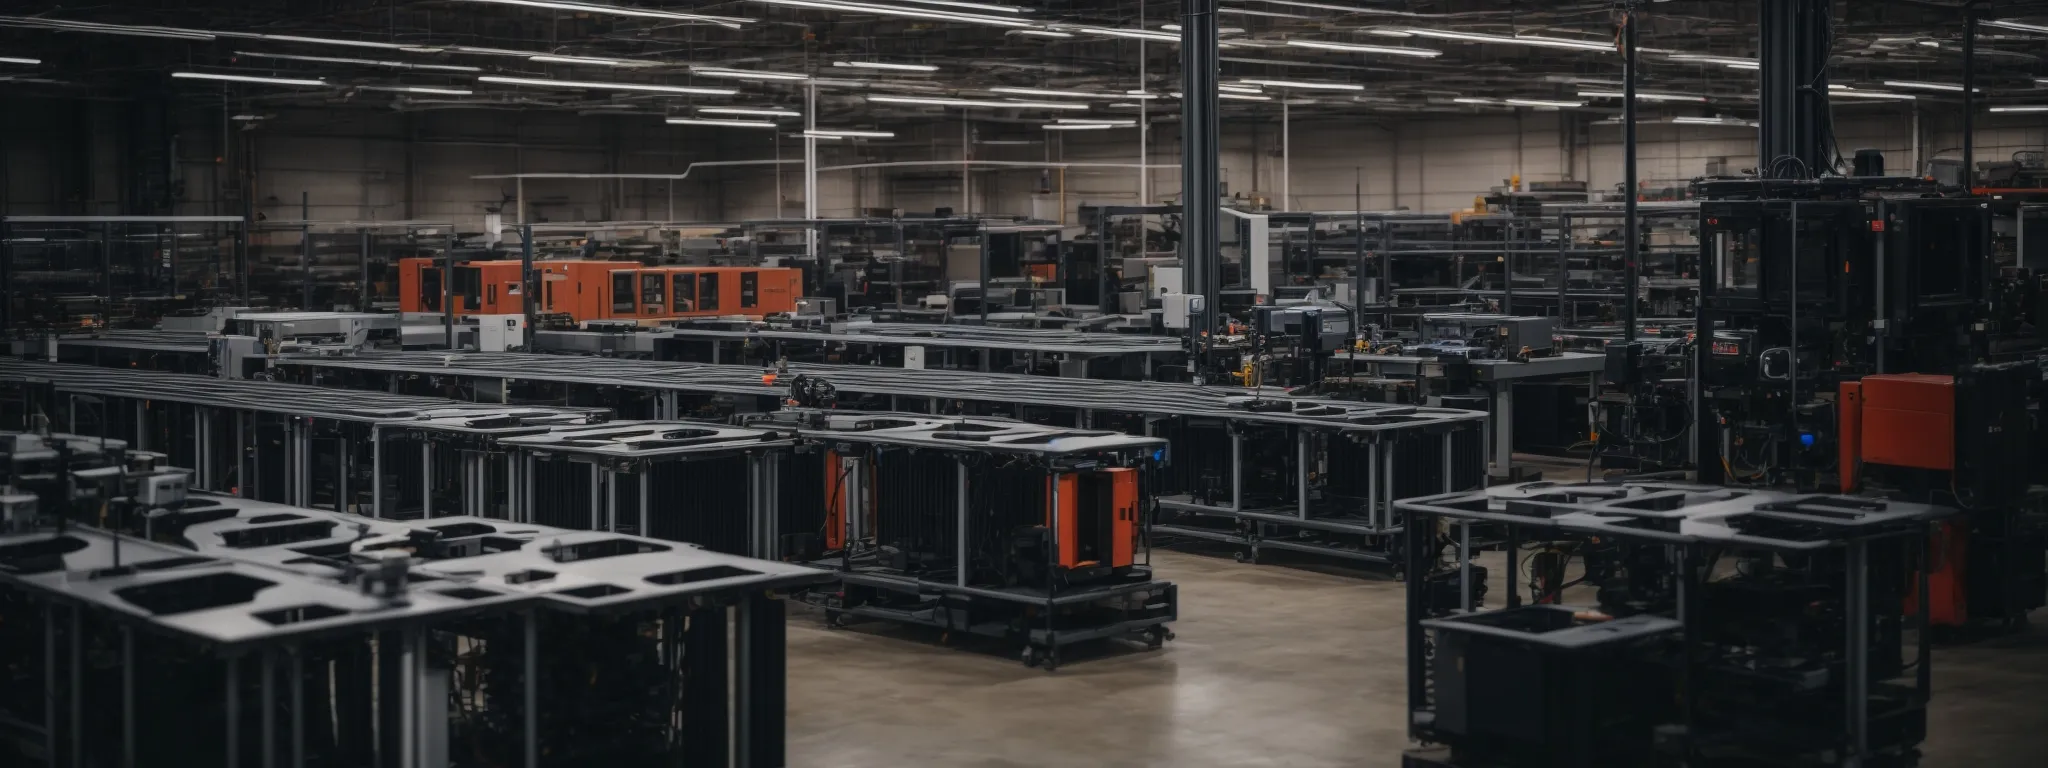 a warehouse filled with rows of 3d printers systematically crafting multiple objects simultaneously.